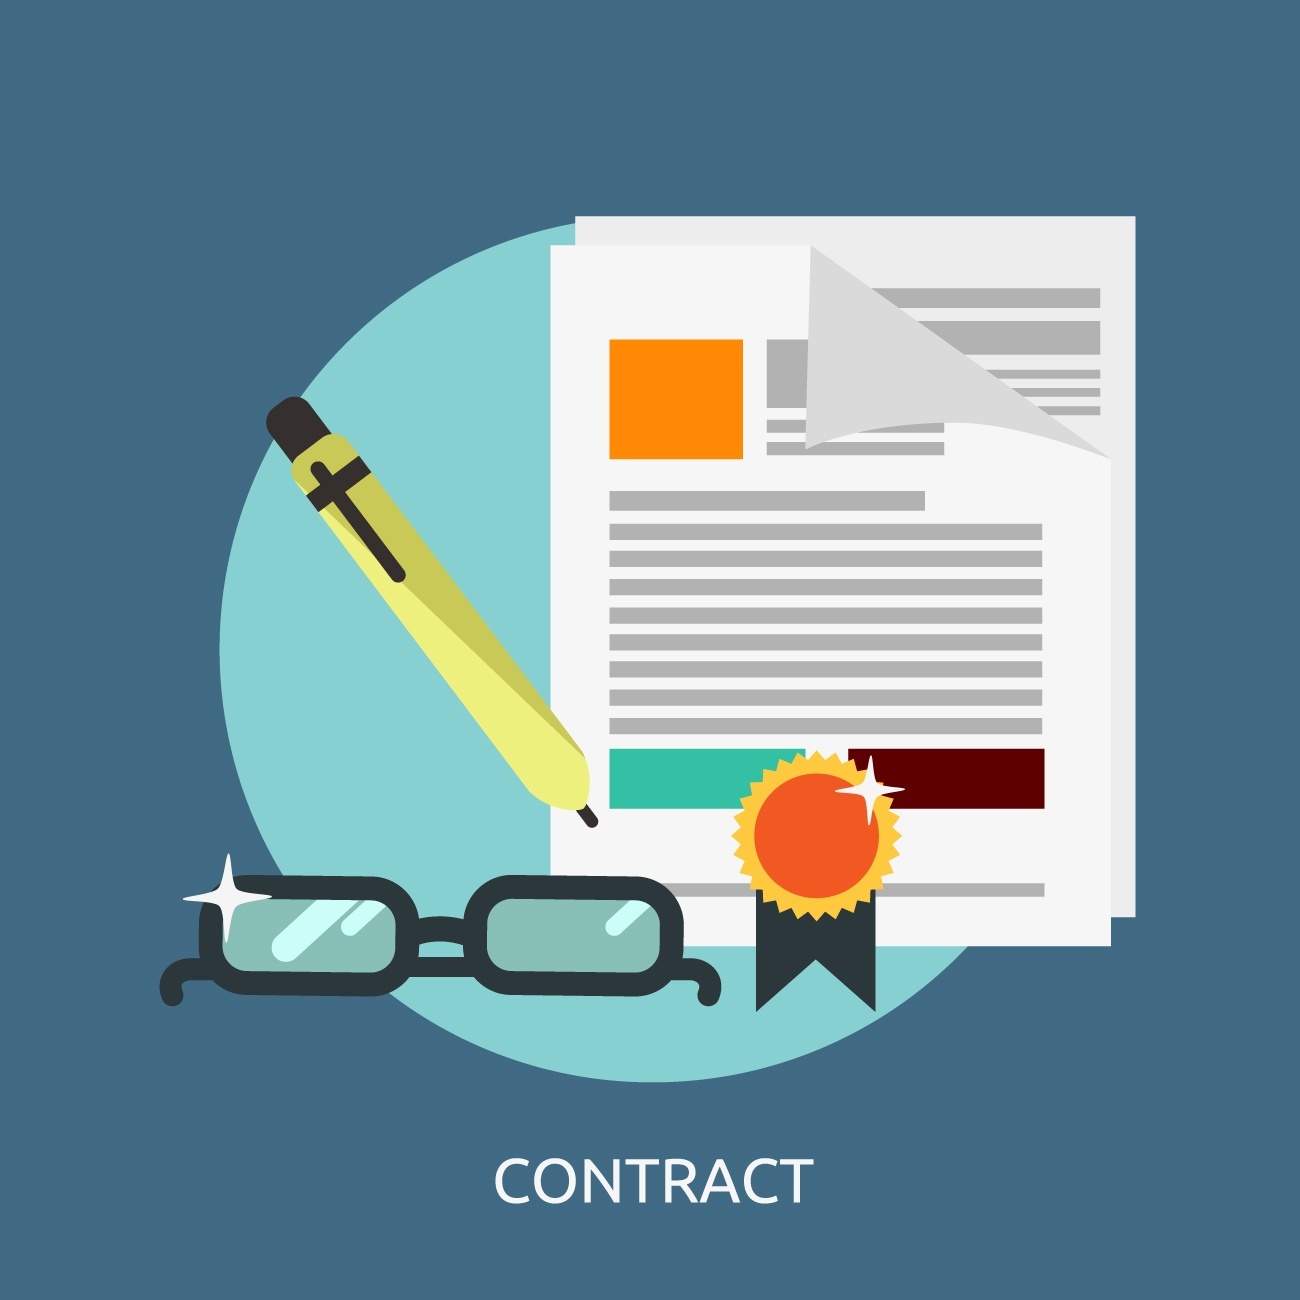 Fundamentals of Oil & Gas Contract Management